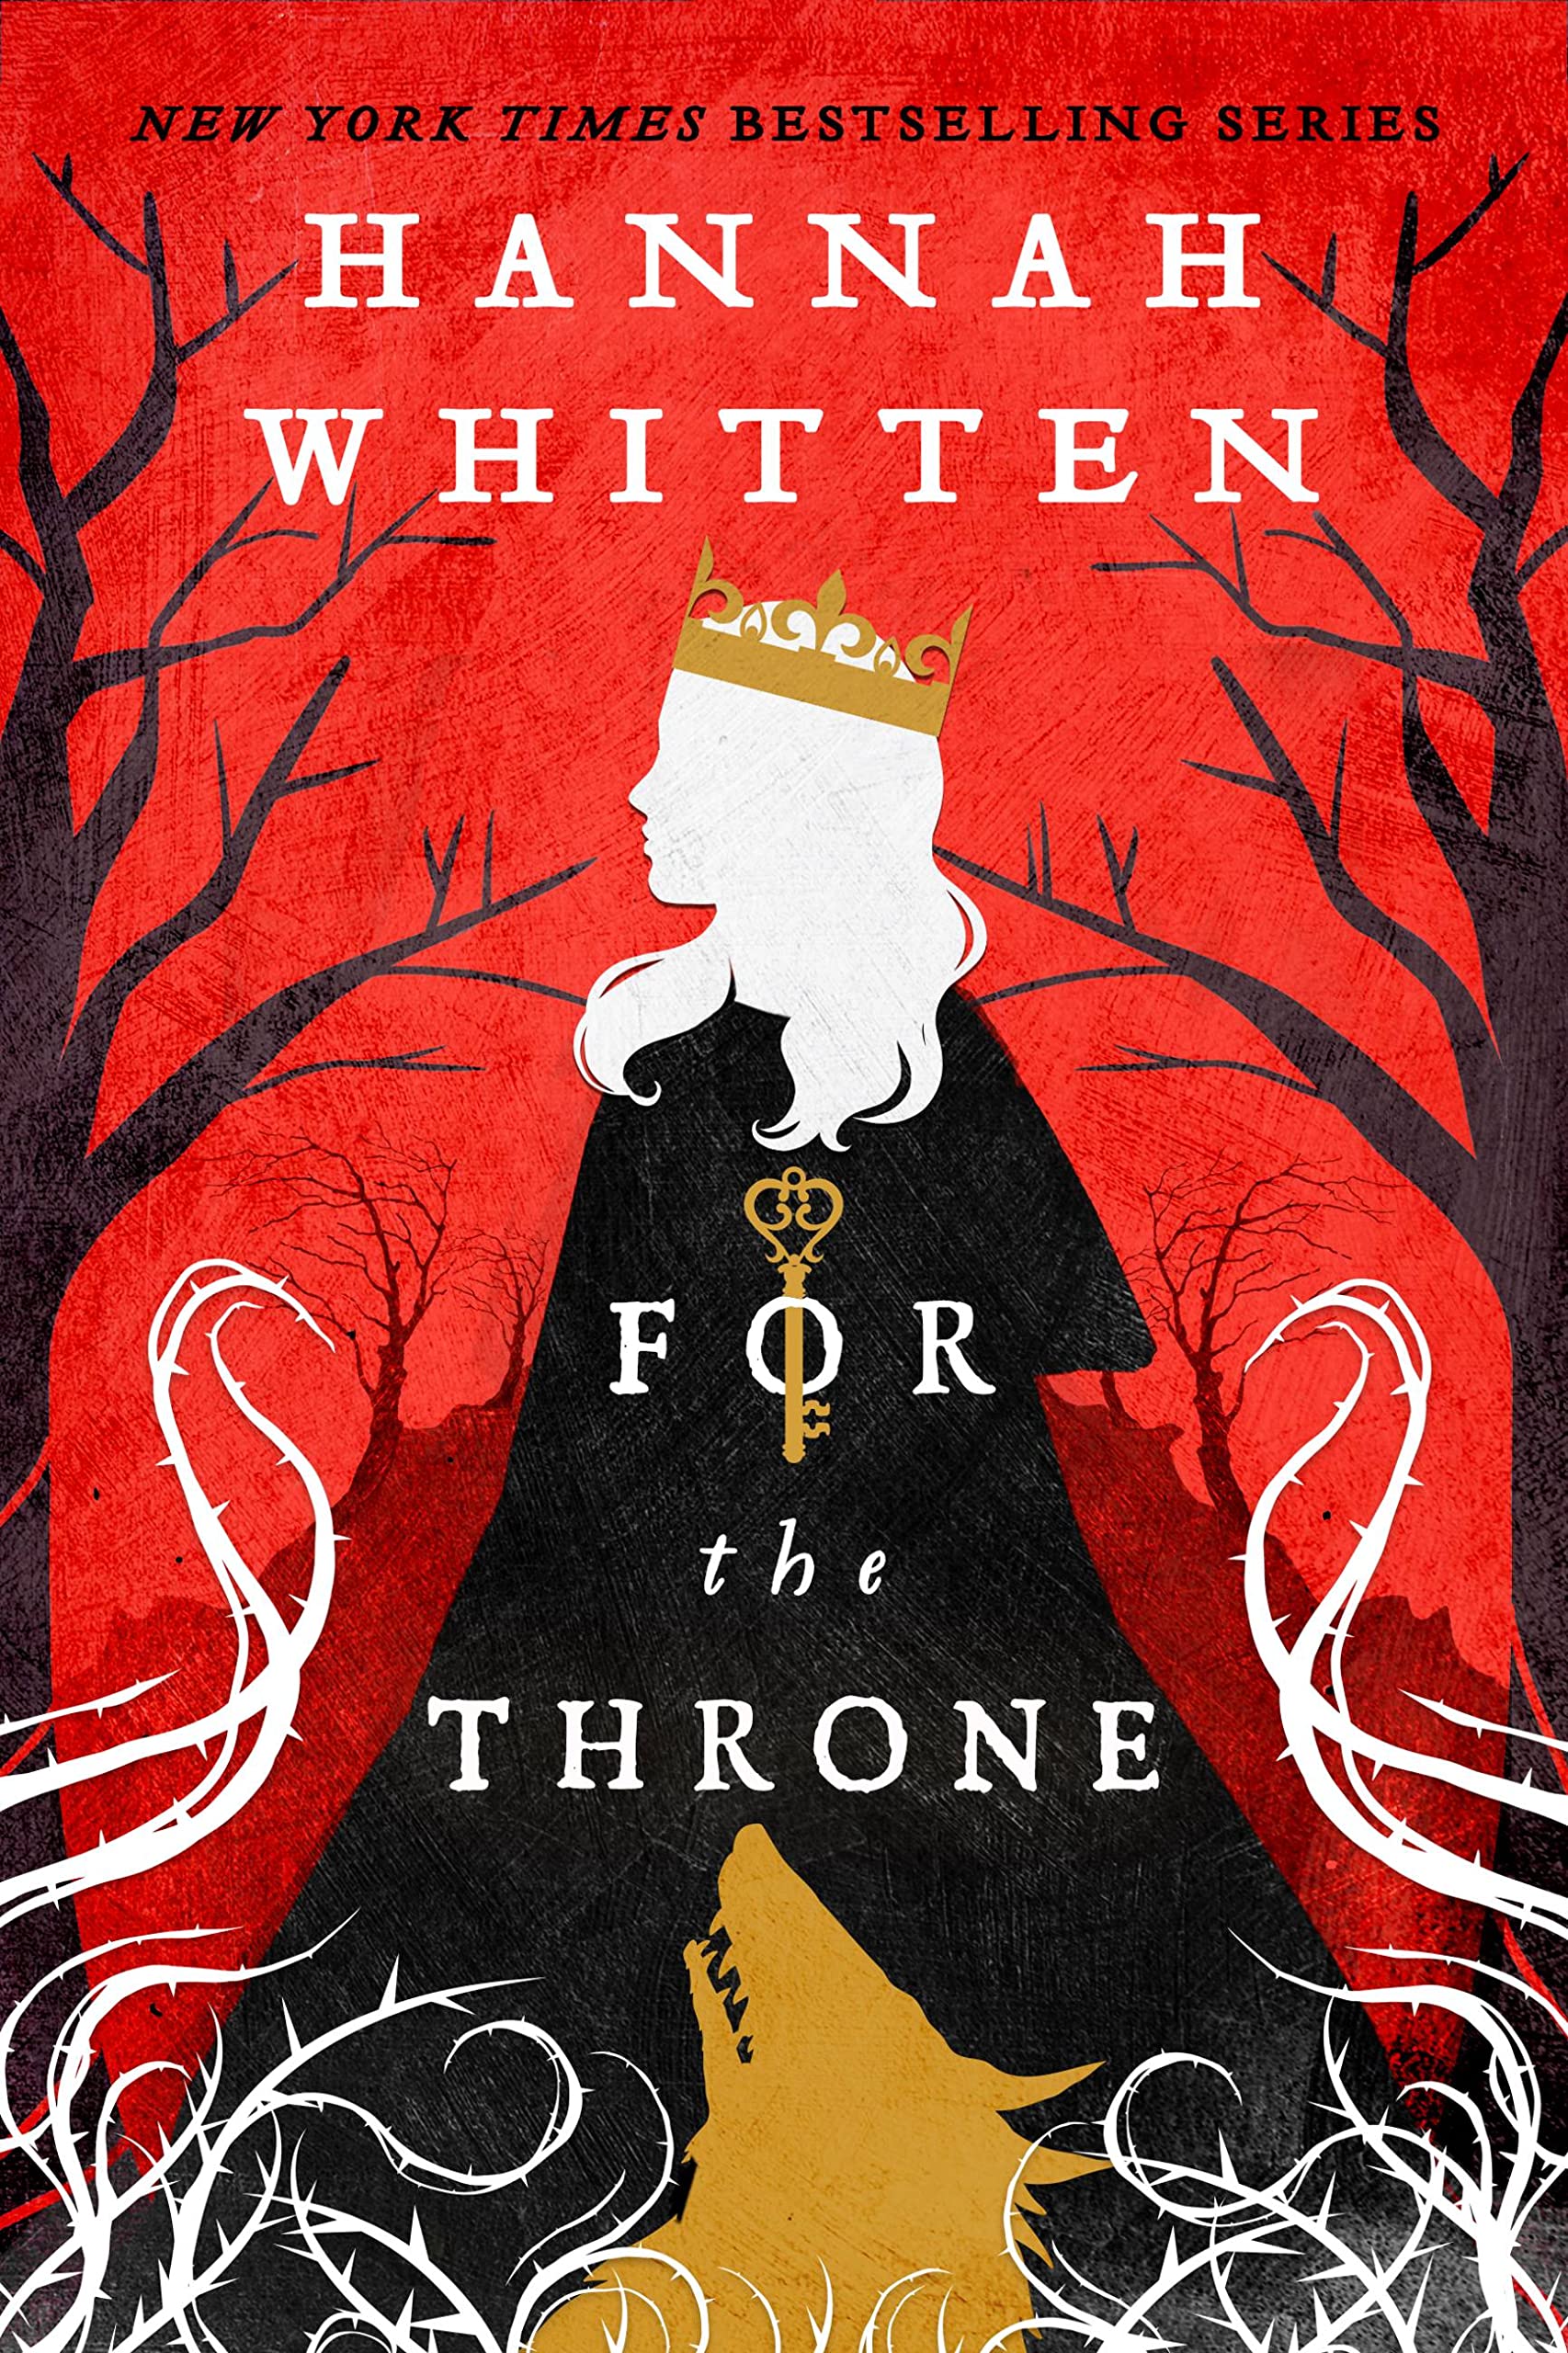 Image for "For the Throne"